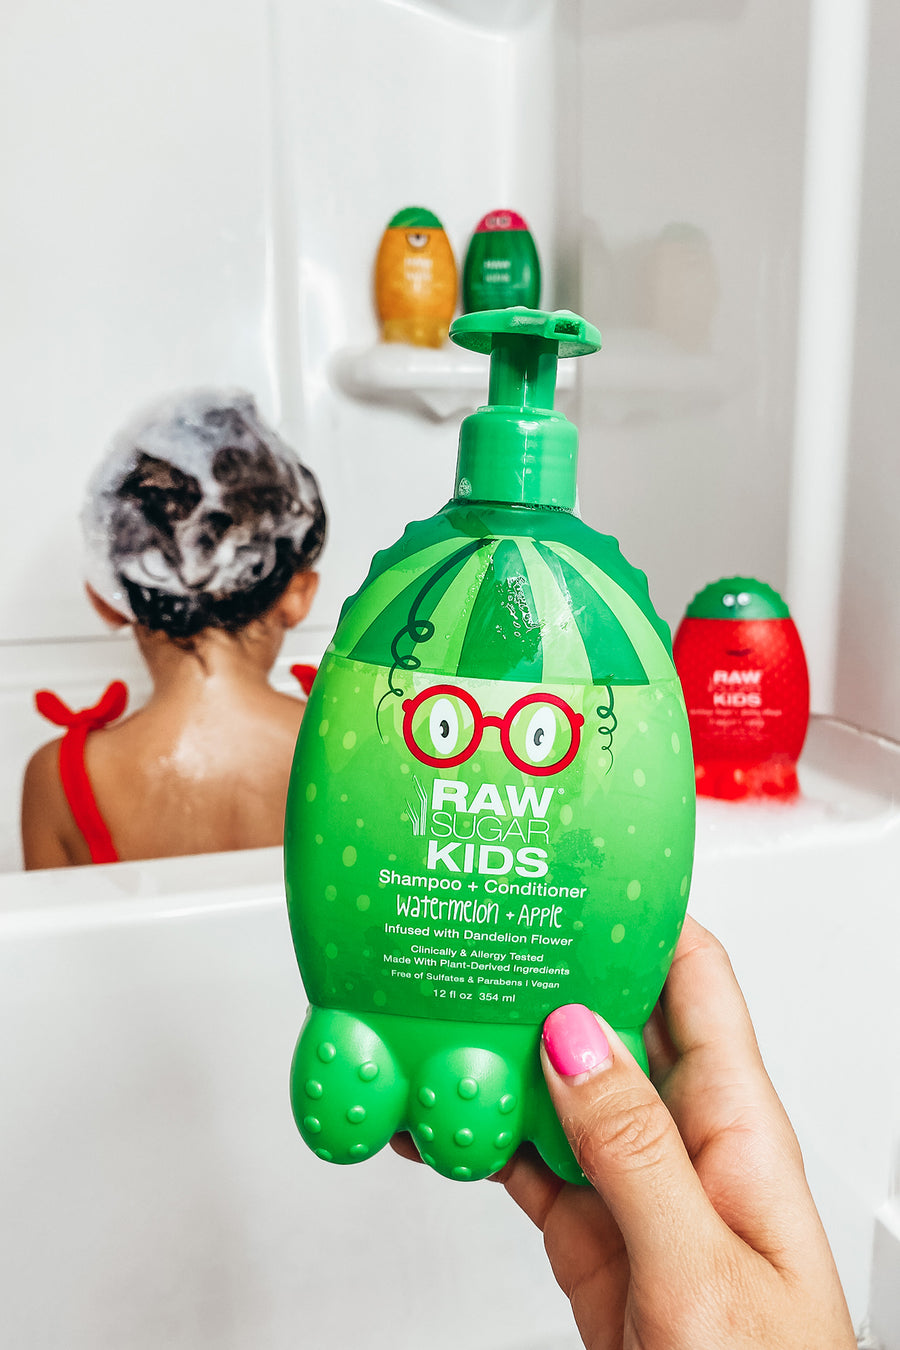 Raw Sugar Kids Watermelon + Apple Shampoo/Conditioner Monster bottle held up in a hand in foreground with little girl with sudsy hair sitting in the bathtub